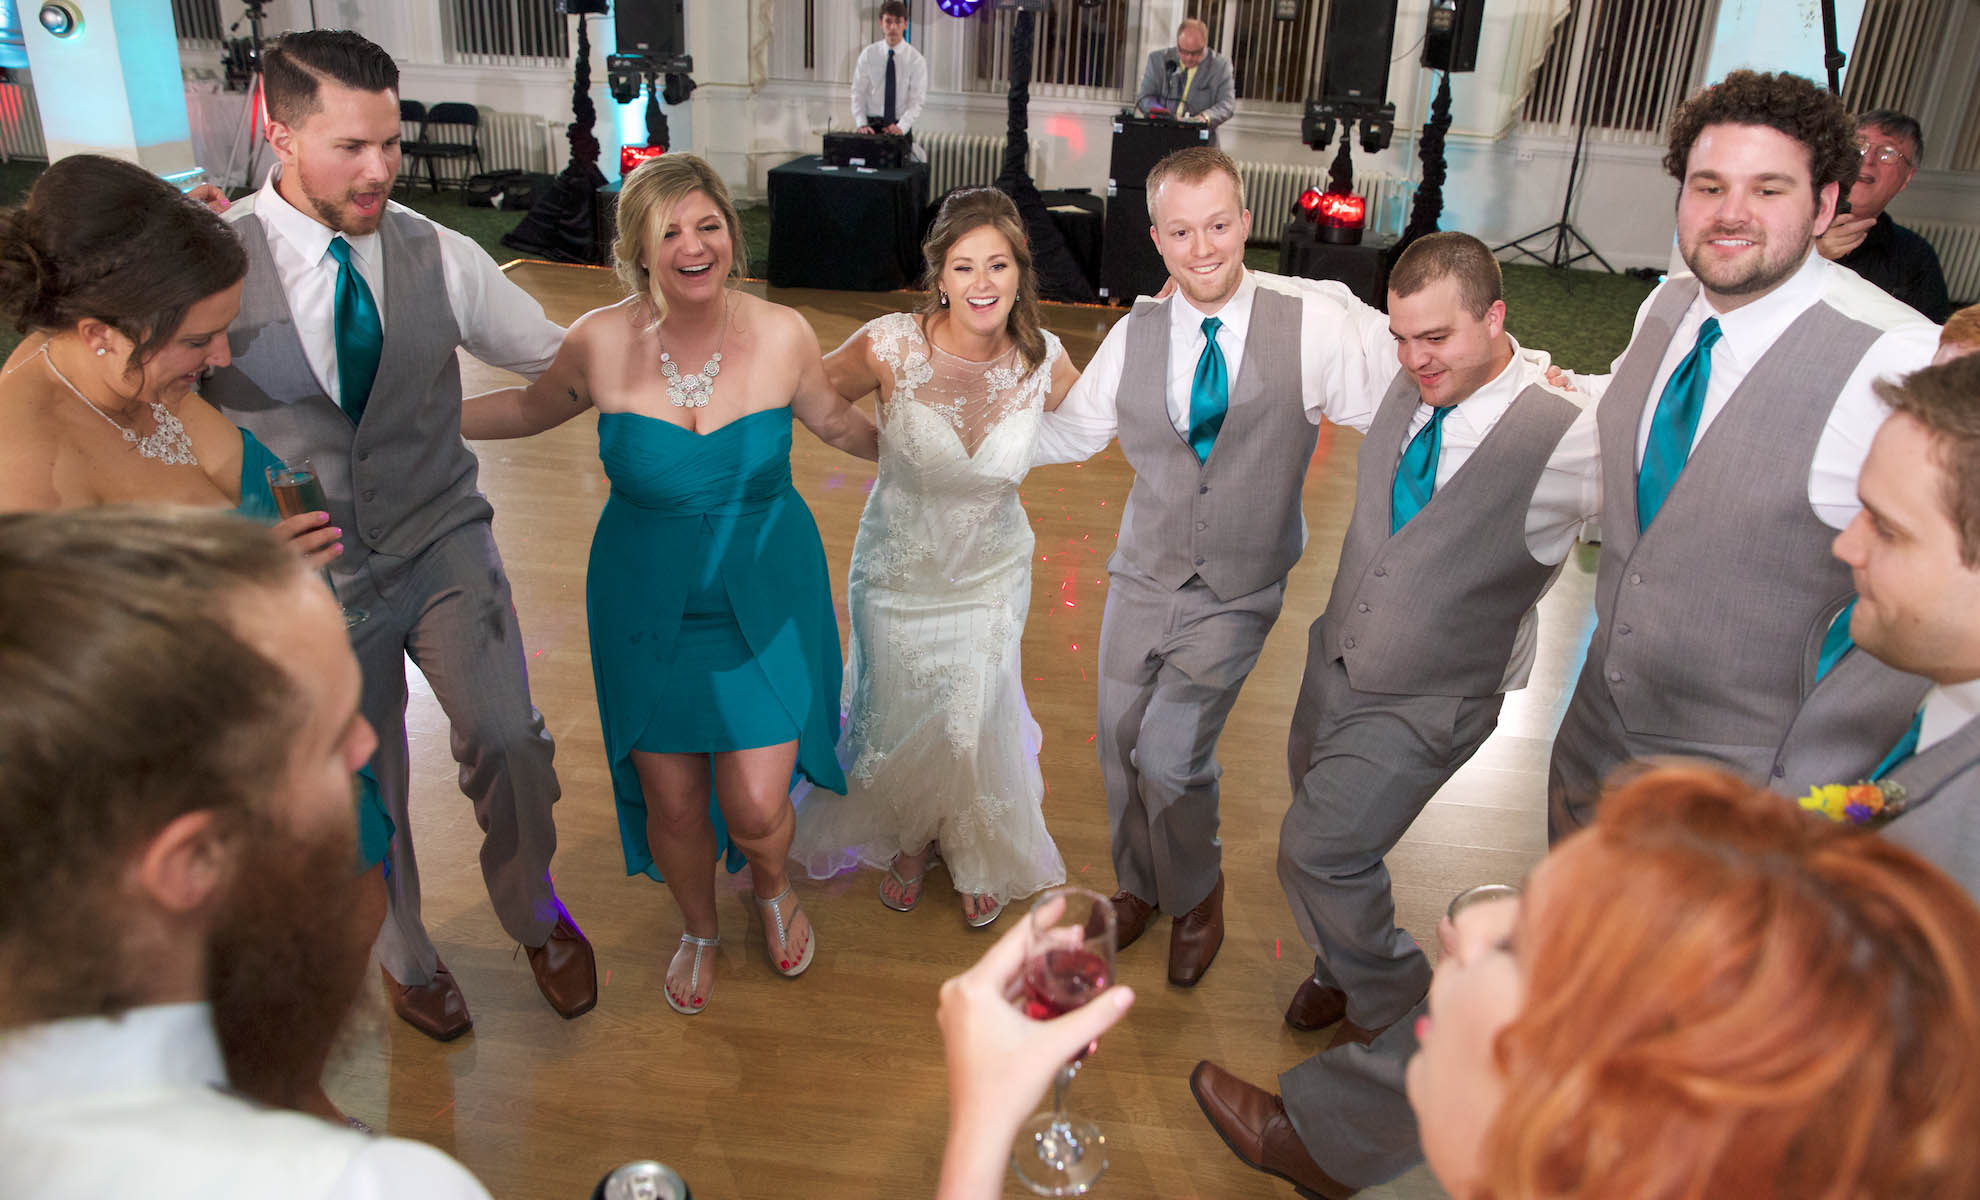 Alissa & Ben start the dancing with their wedding party (DJ is Music Source Professional Disc Jockey Service). Wedding pictures by Tiffany & Steve of Warmowski Photography.